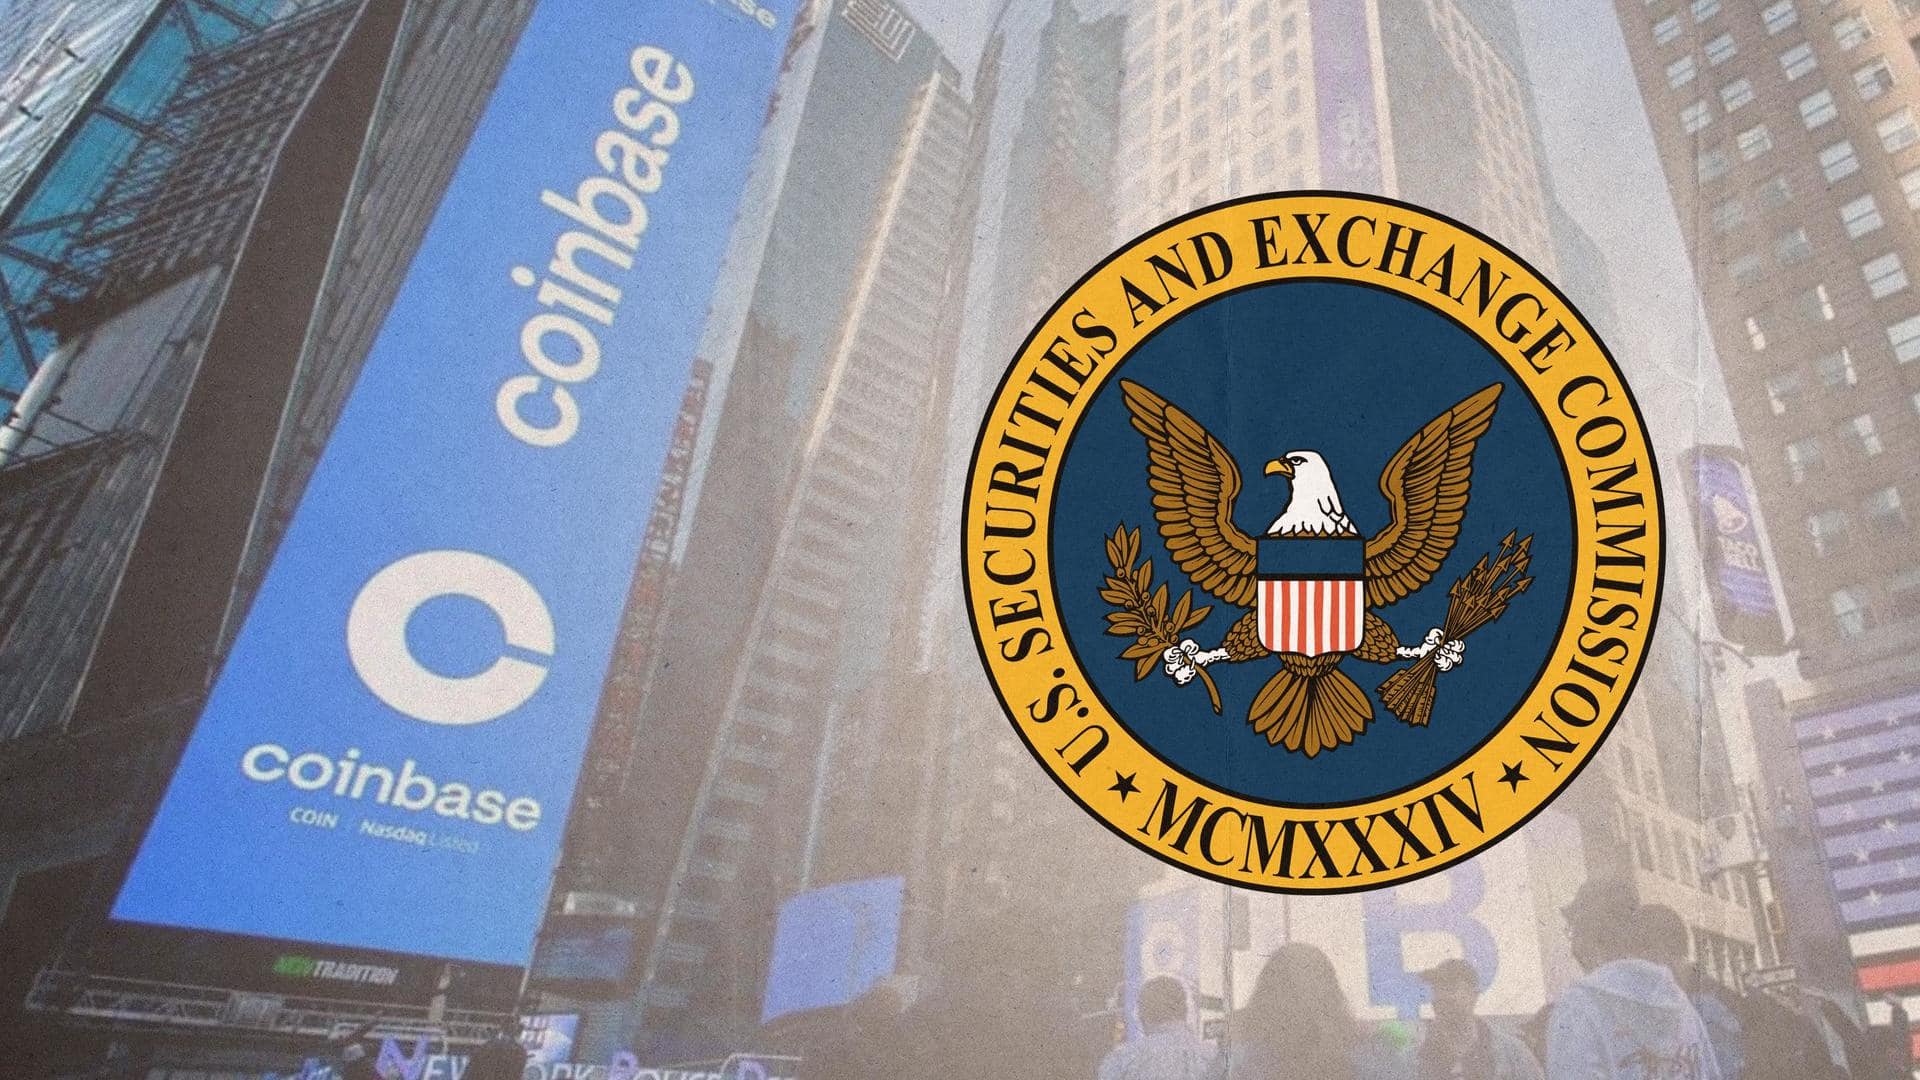 SEC sues Coinbase: What's prompting the crackdown on crypto exchanges